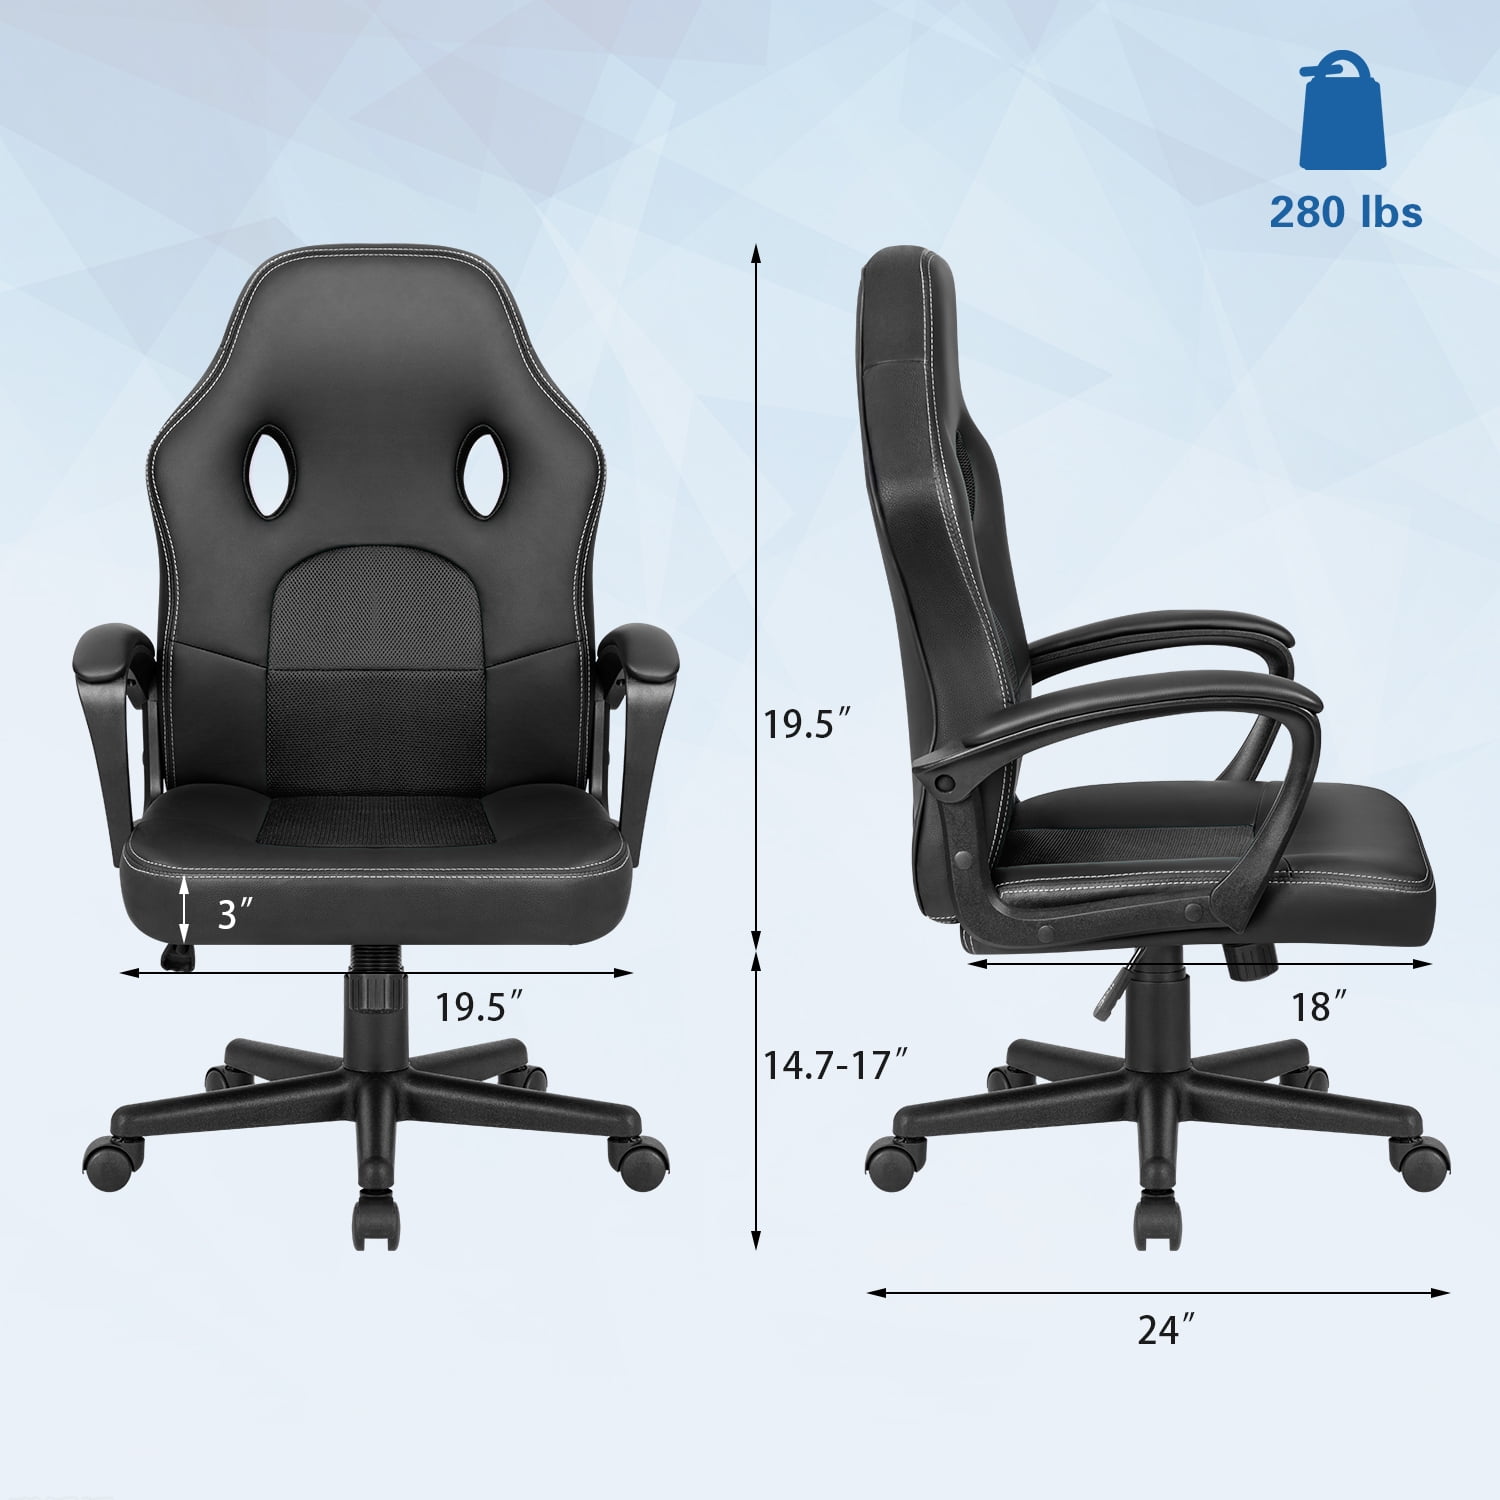 Lacoo PU Leather Gaming Computer Chair with Footrest and Lumbar Support -  The SUP Desk